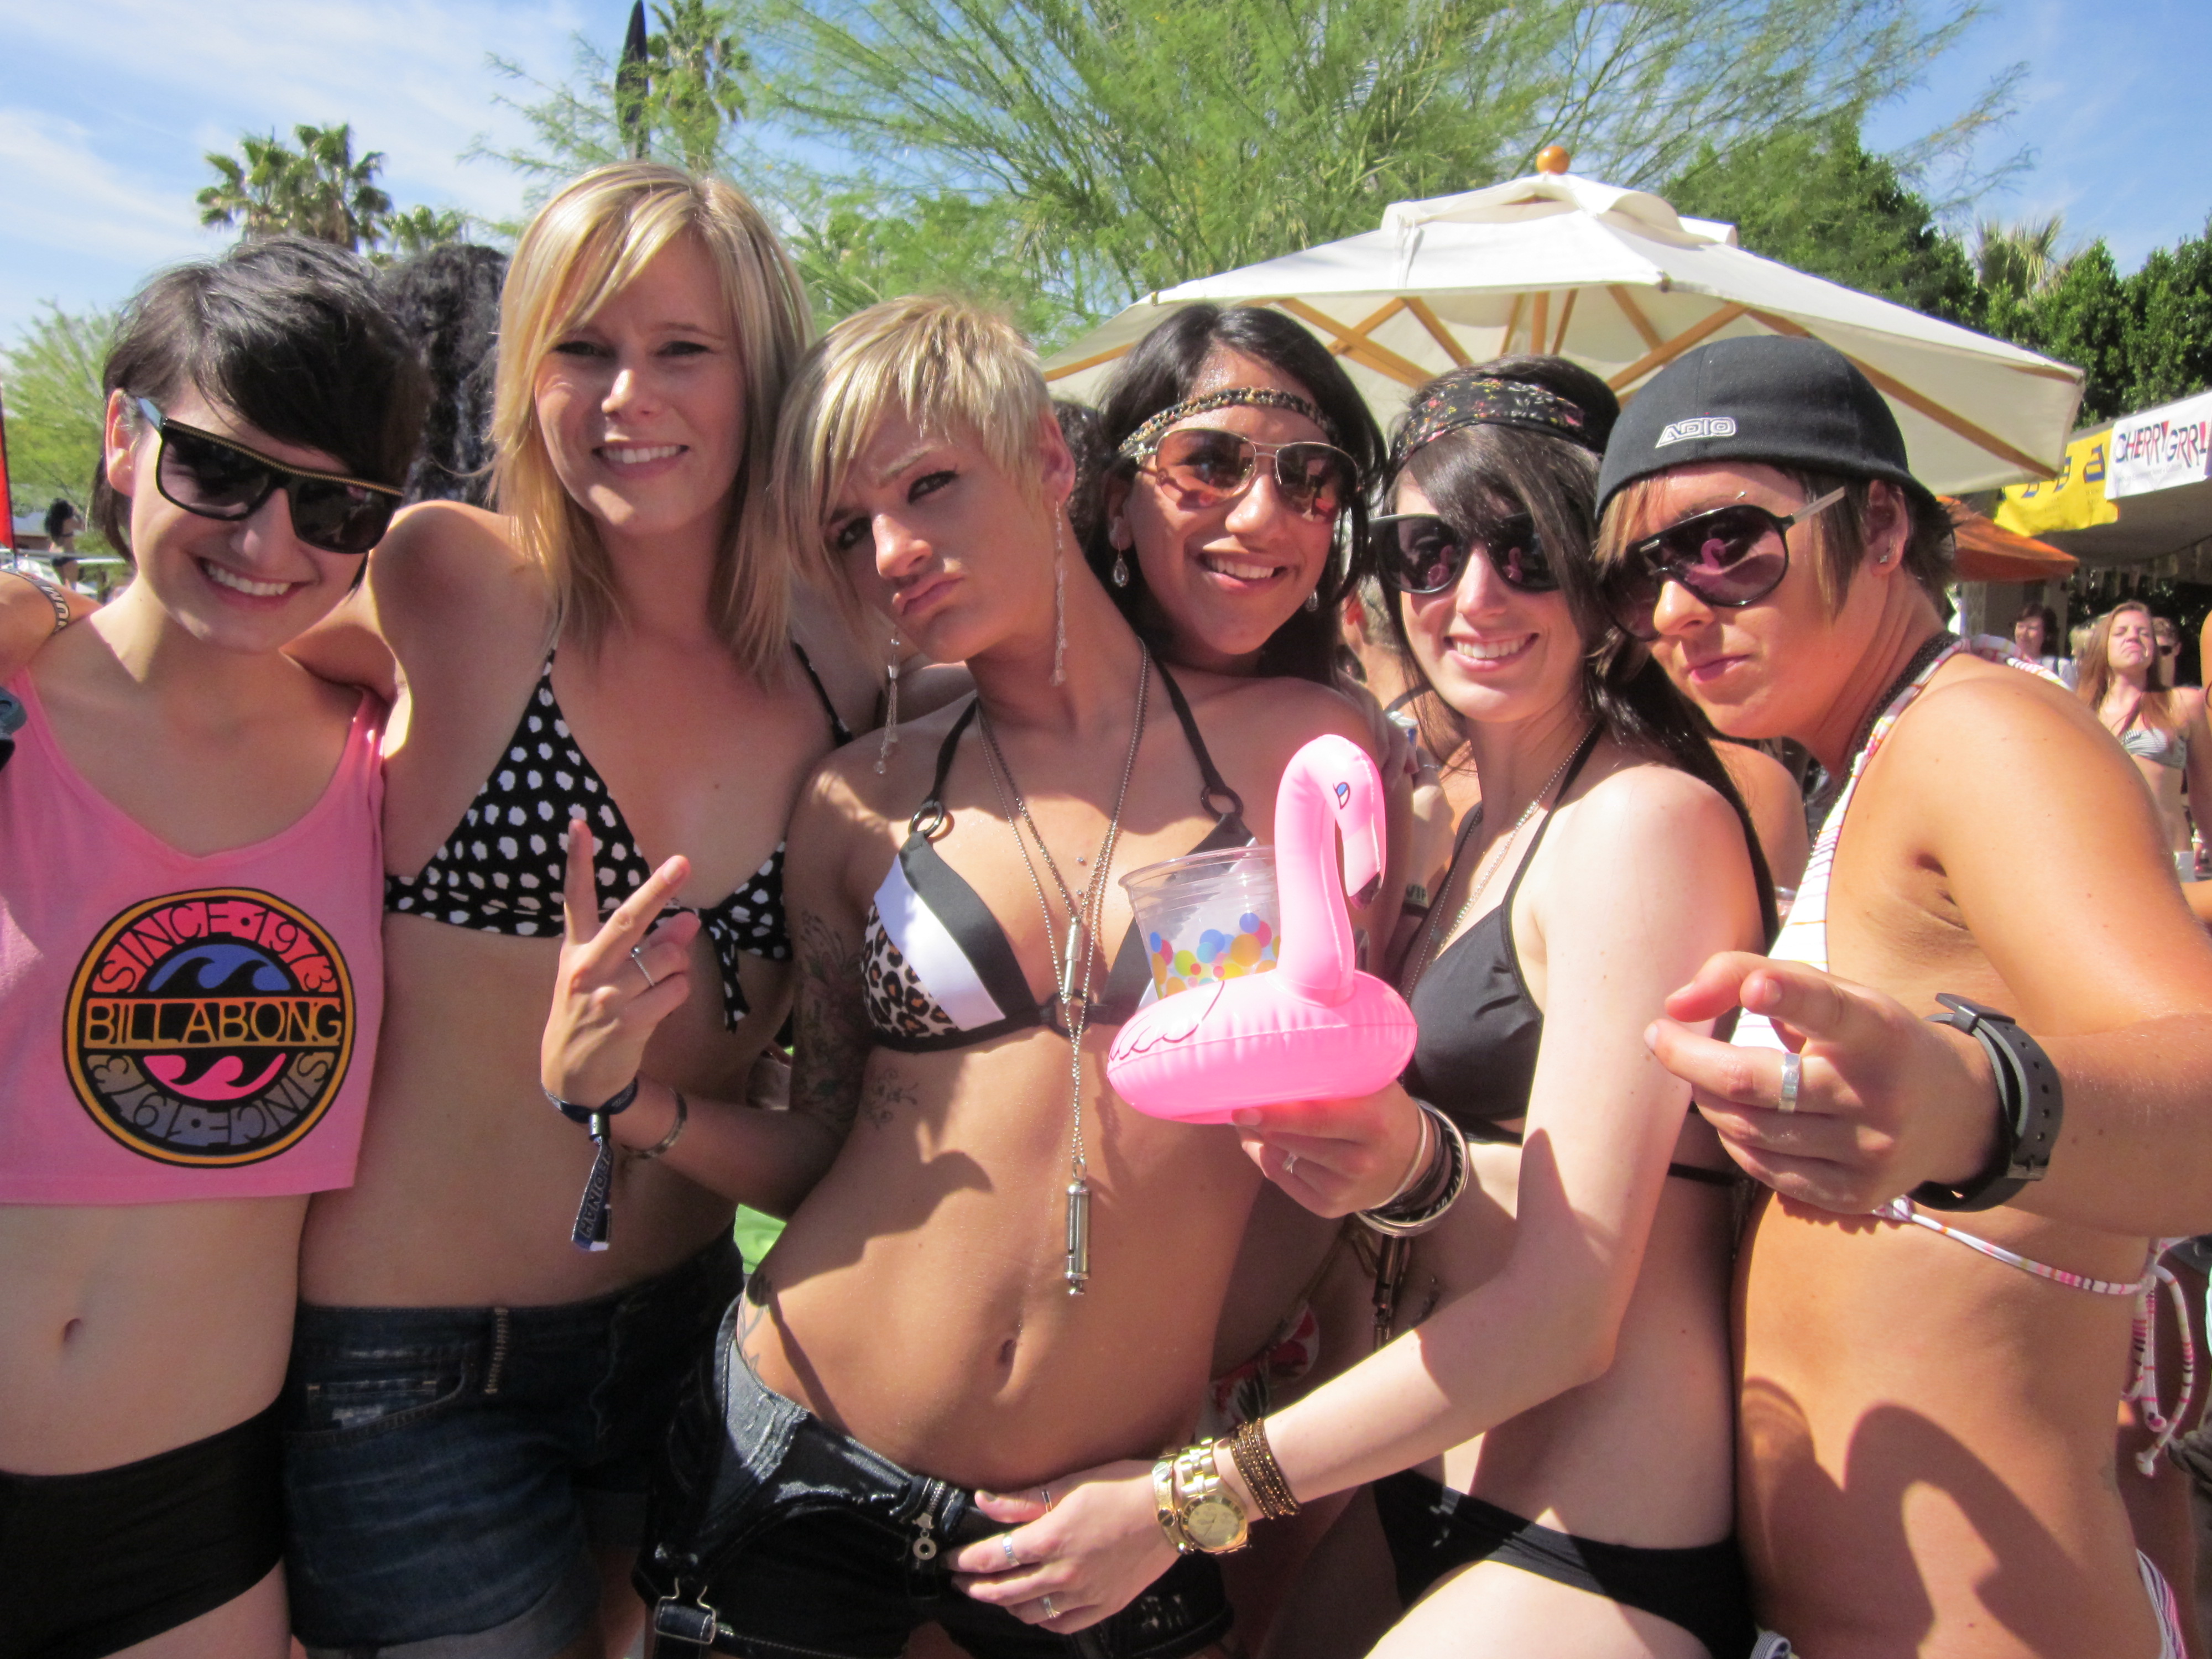 Cum Orgy Dinah Shore Weekend - Brittani Does Dinah Shore 2012 Remembers Some Of It | CLOUDY GIRL PICS